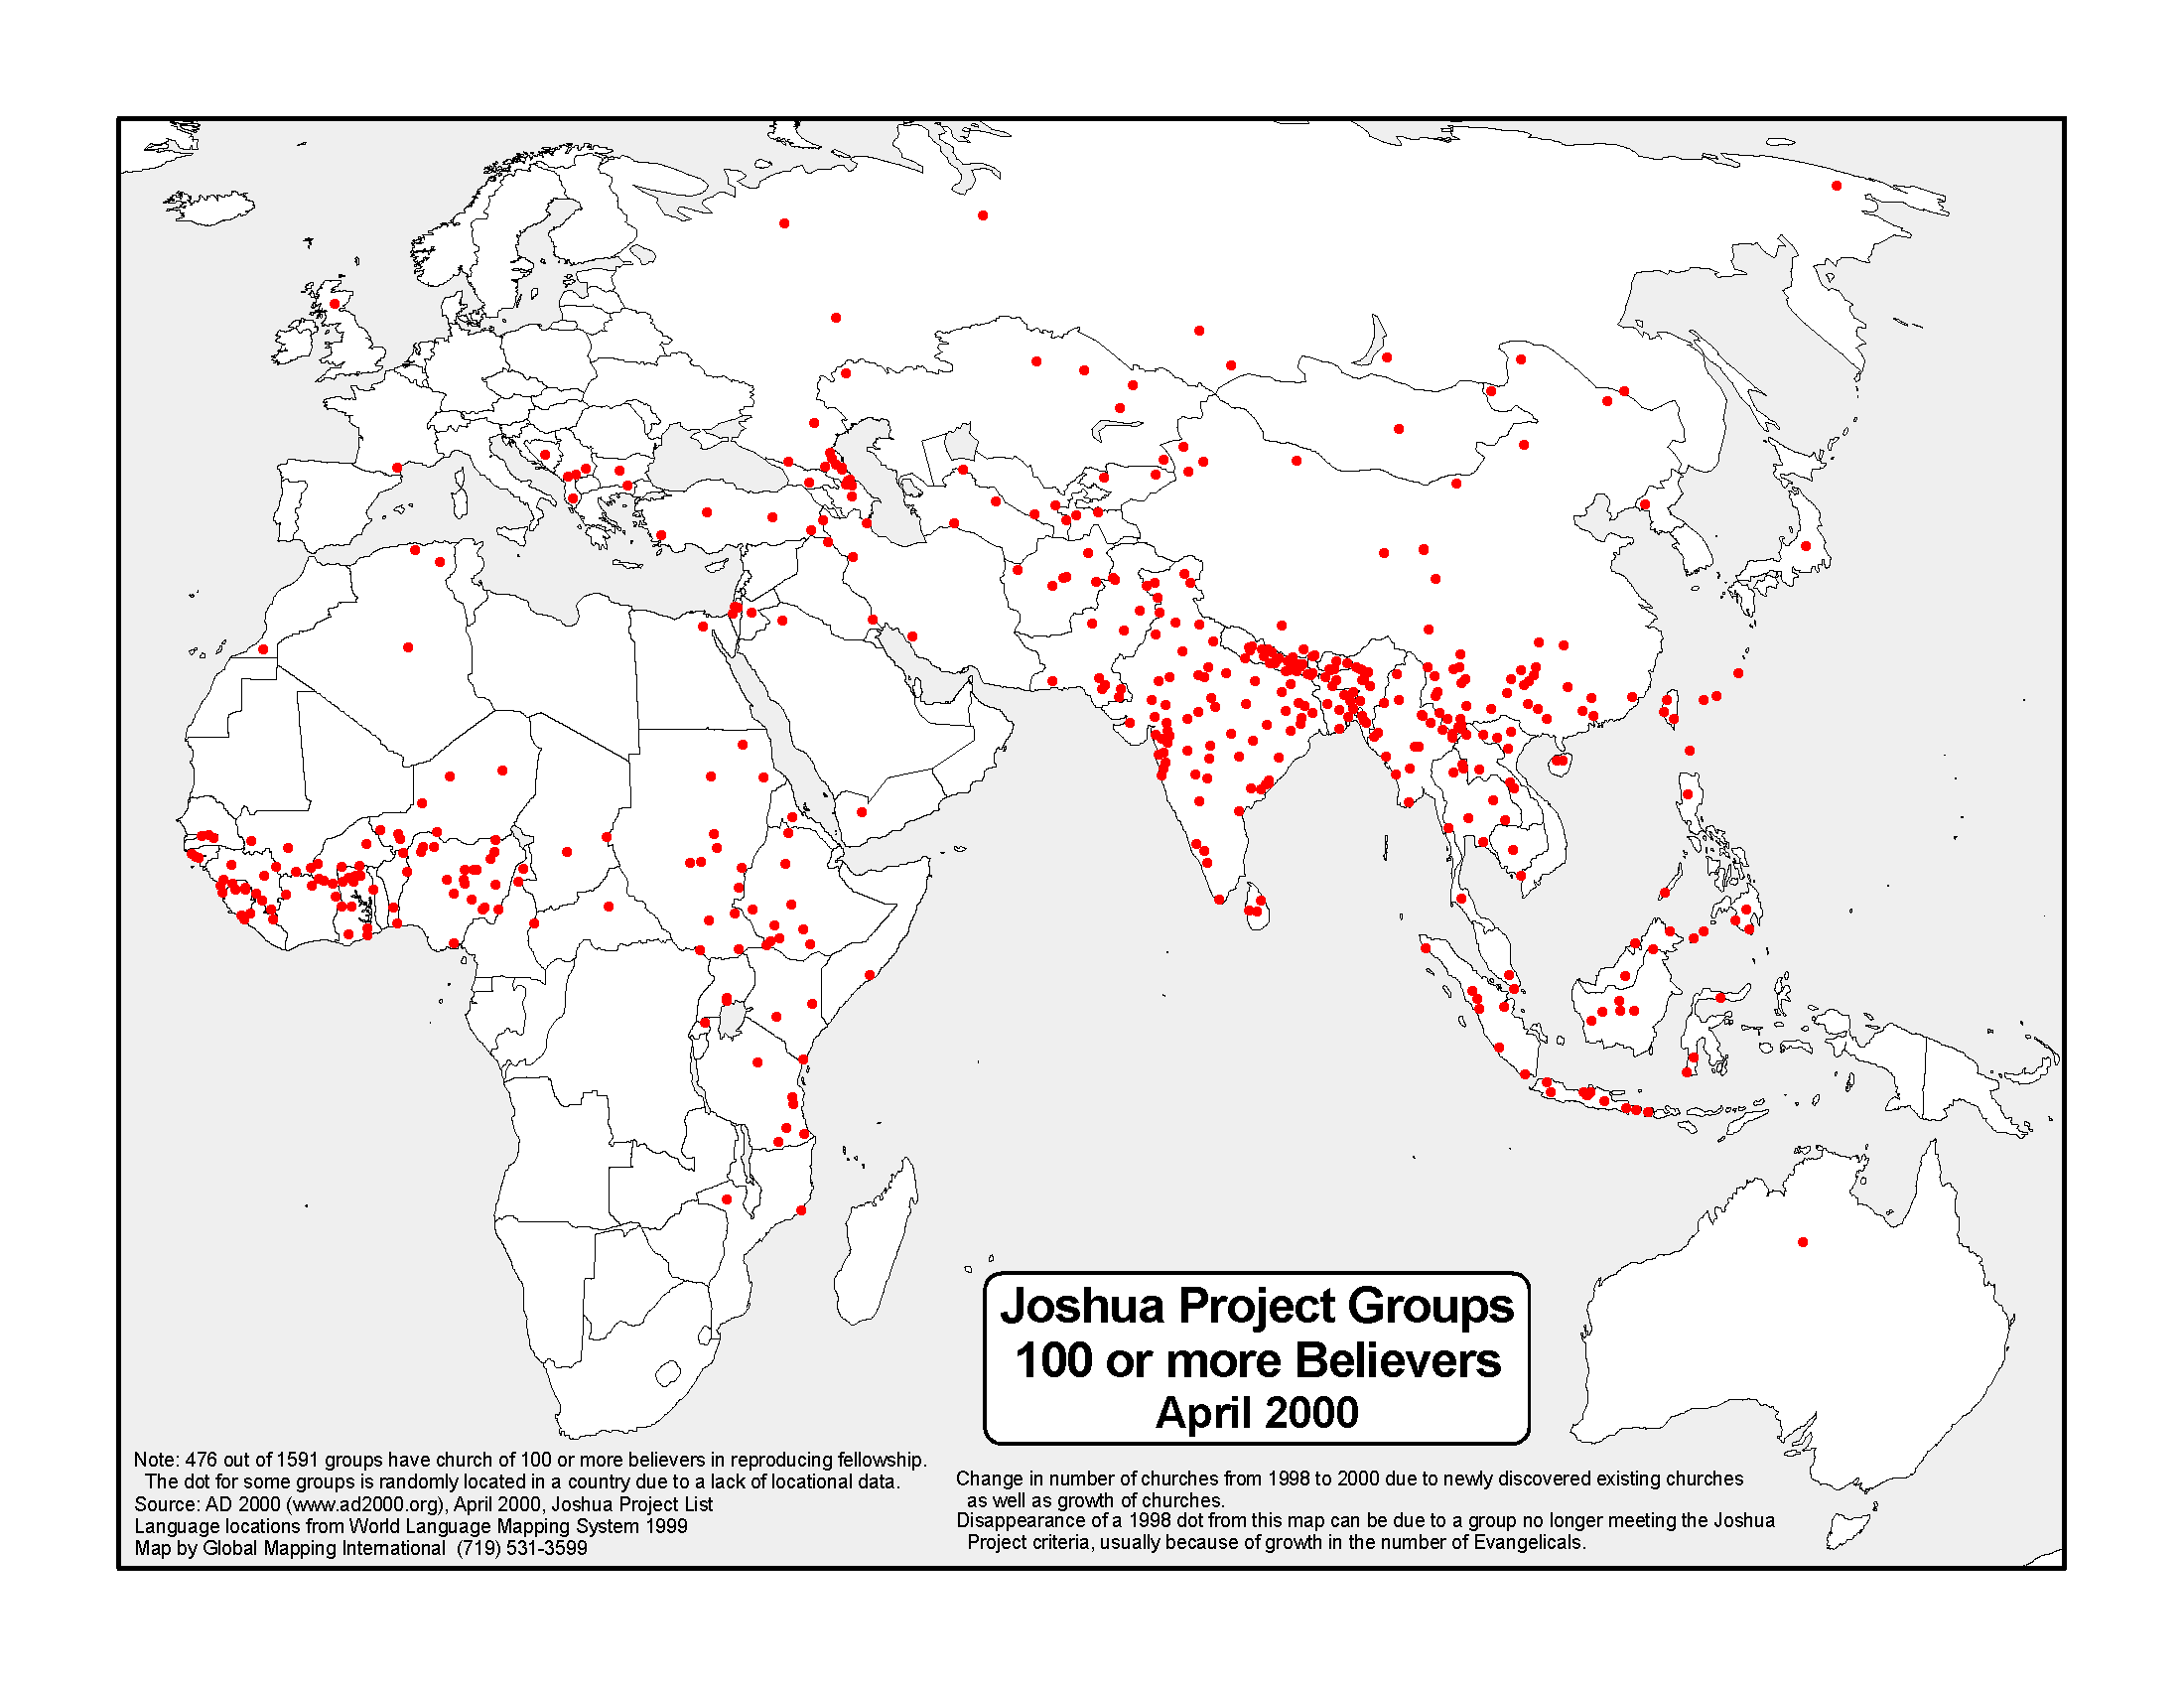 Joshua Project Groups with 100 or more Believers April 2000 (BW)